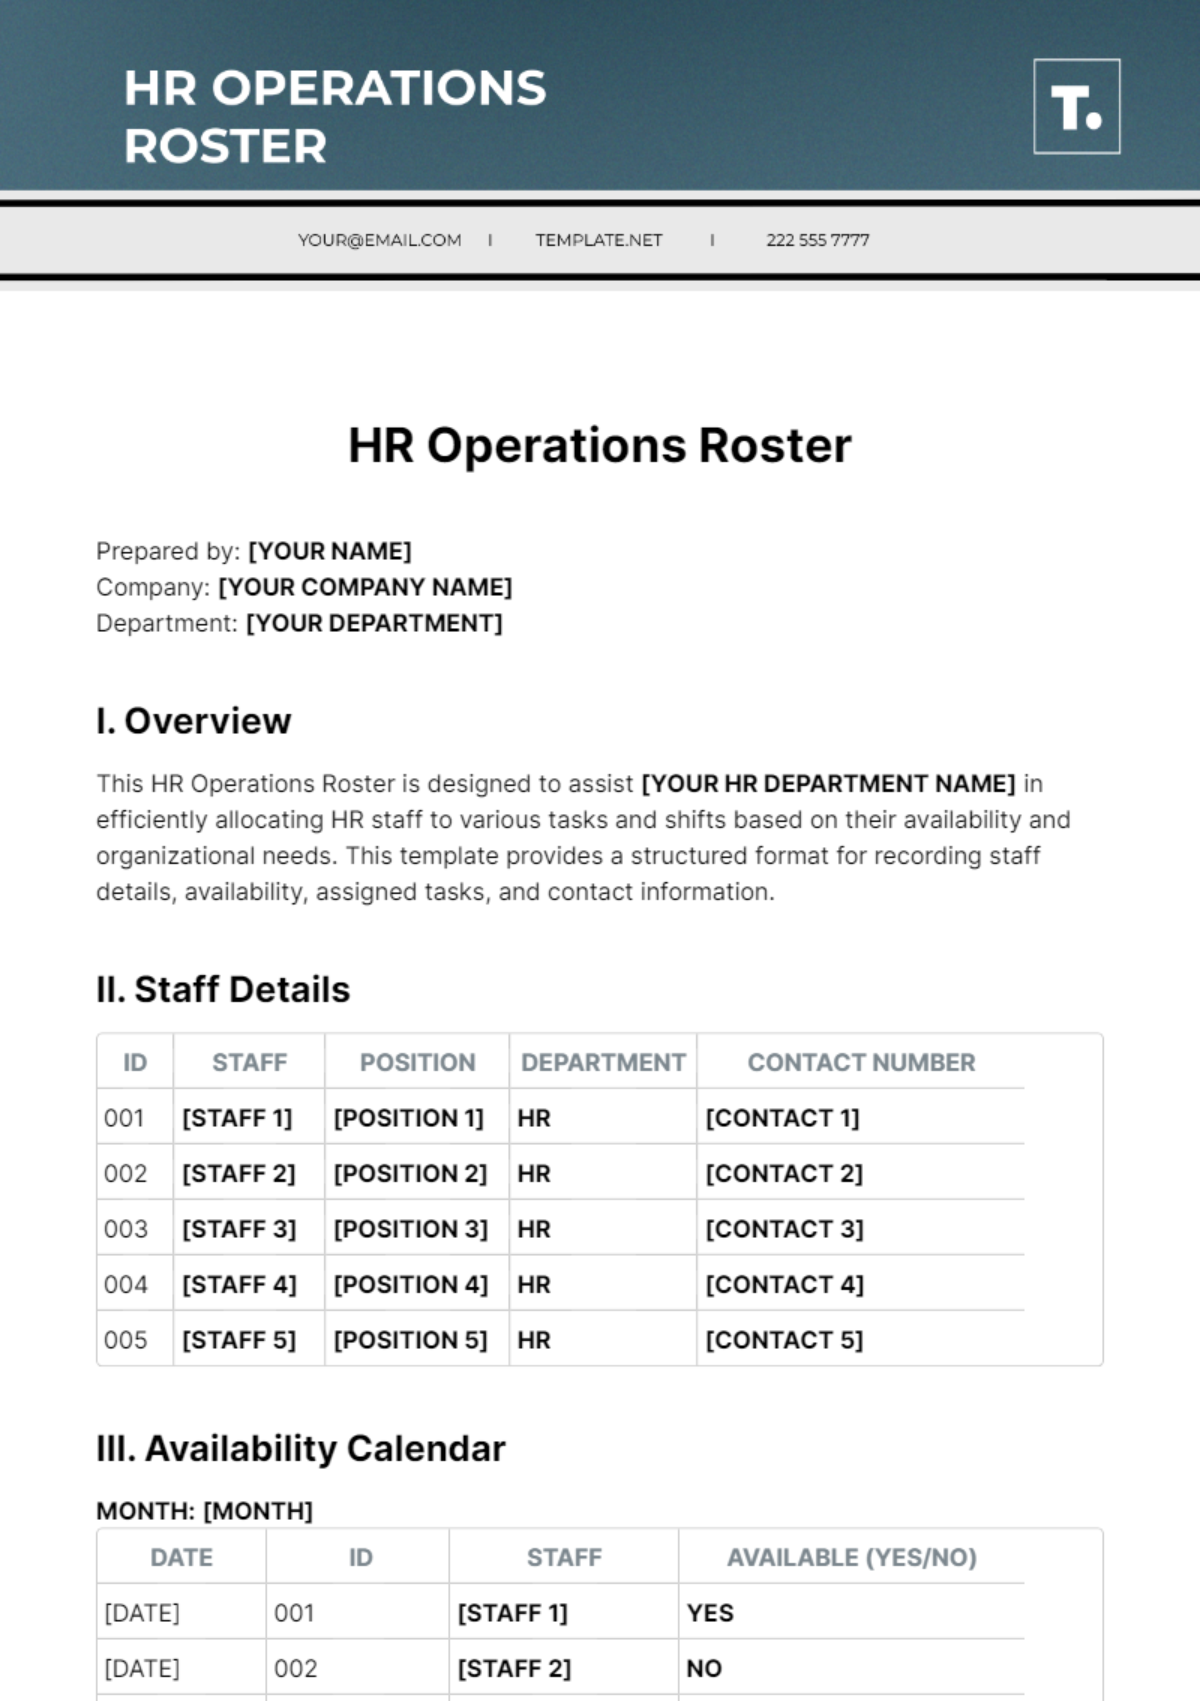 HR Operations Roster Template